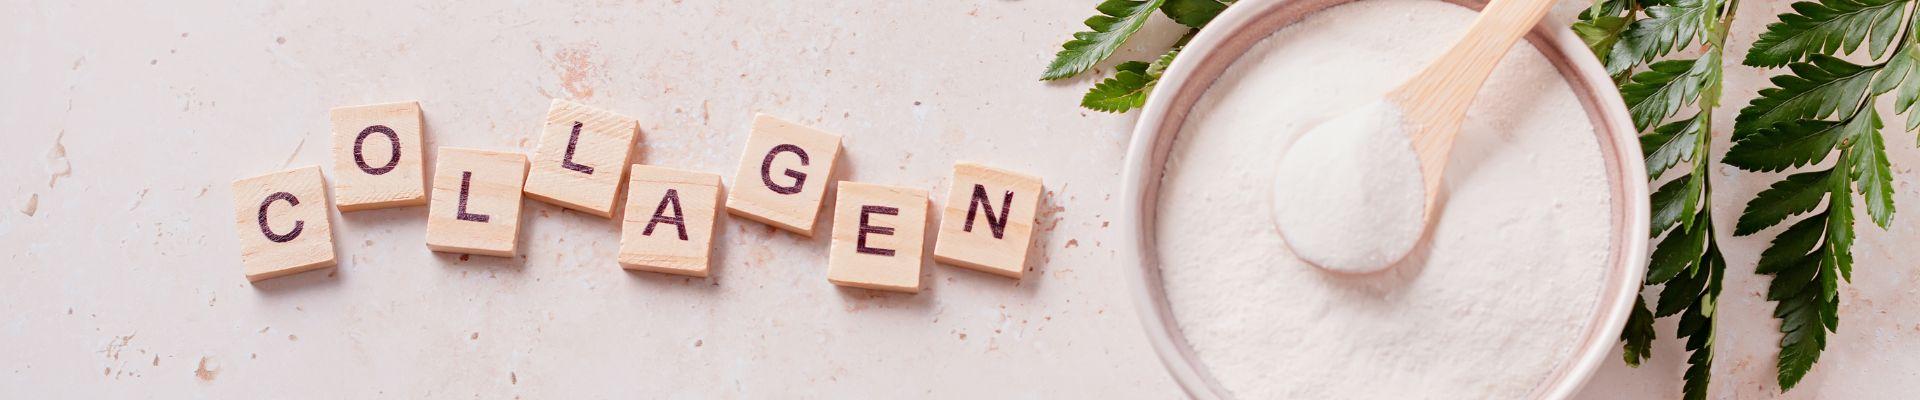 The Best Collagen Supplements for Healthy Skin and Hair